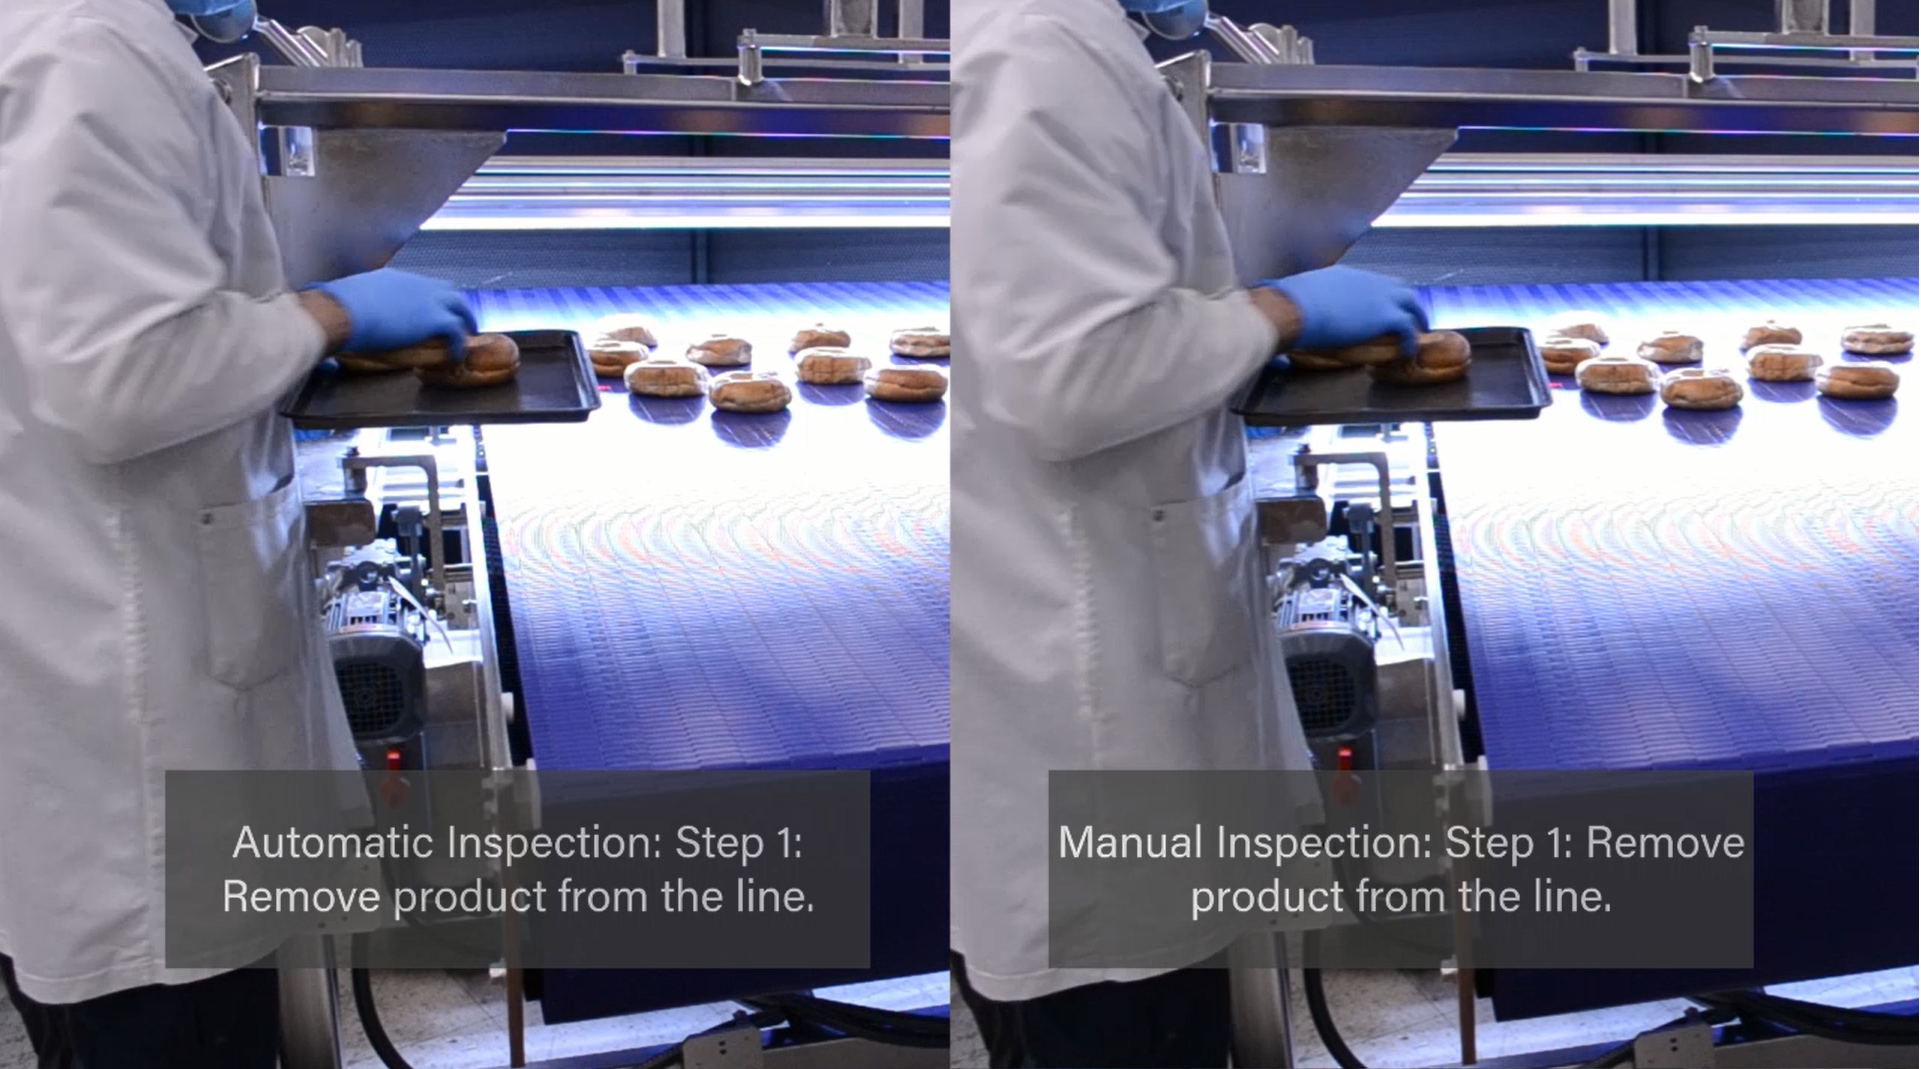 manual versus automatic food inspection